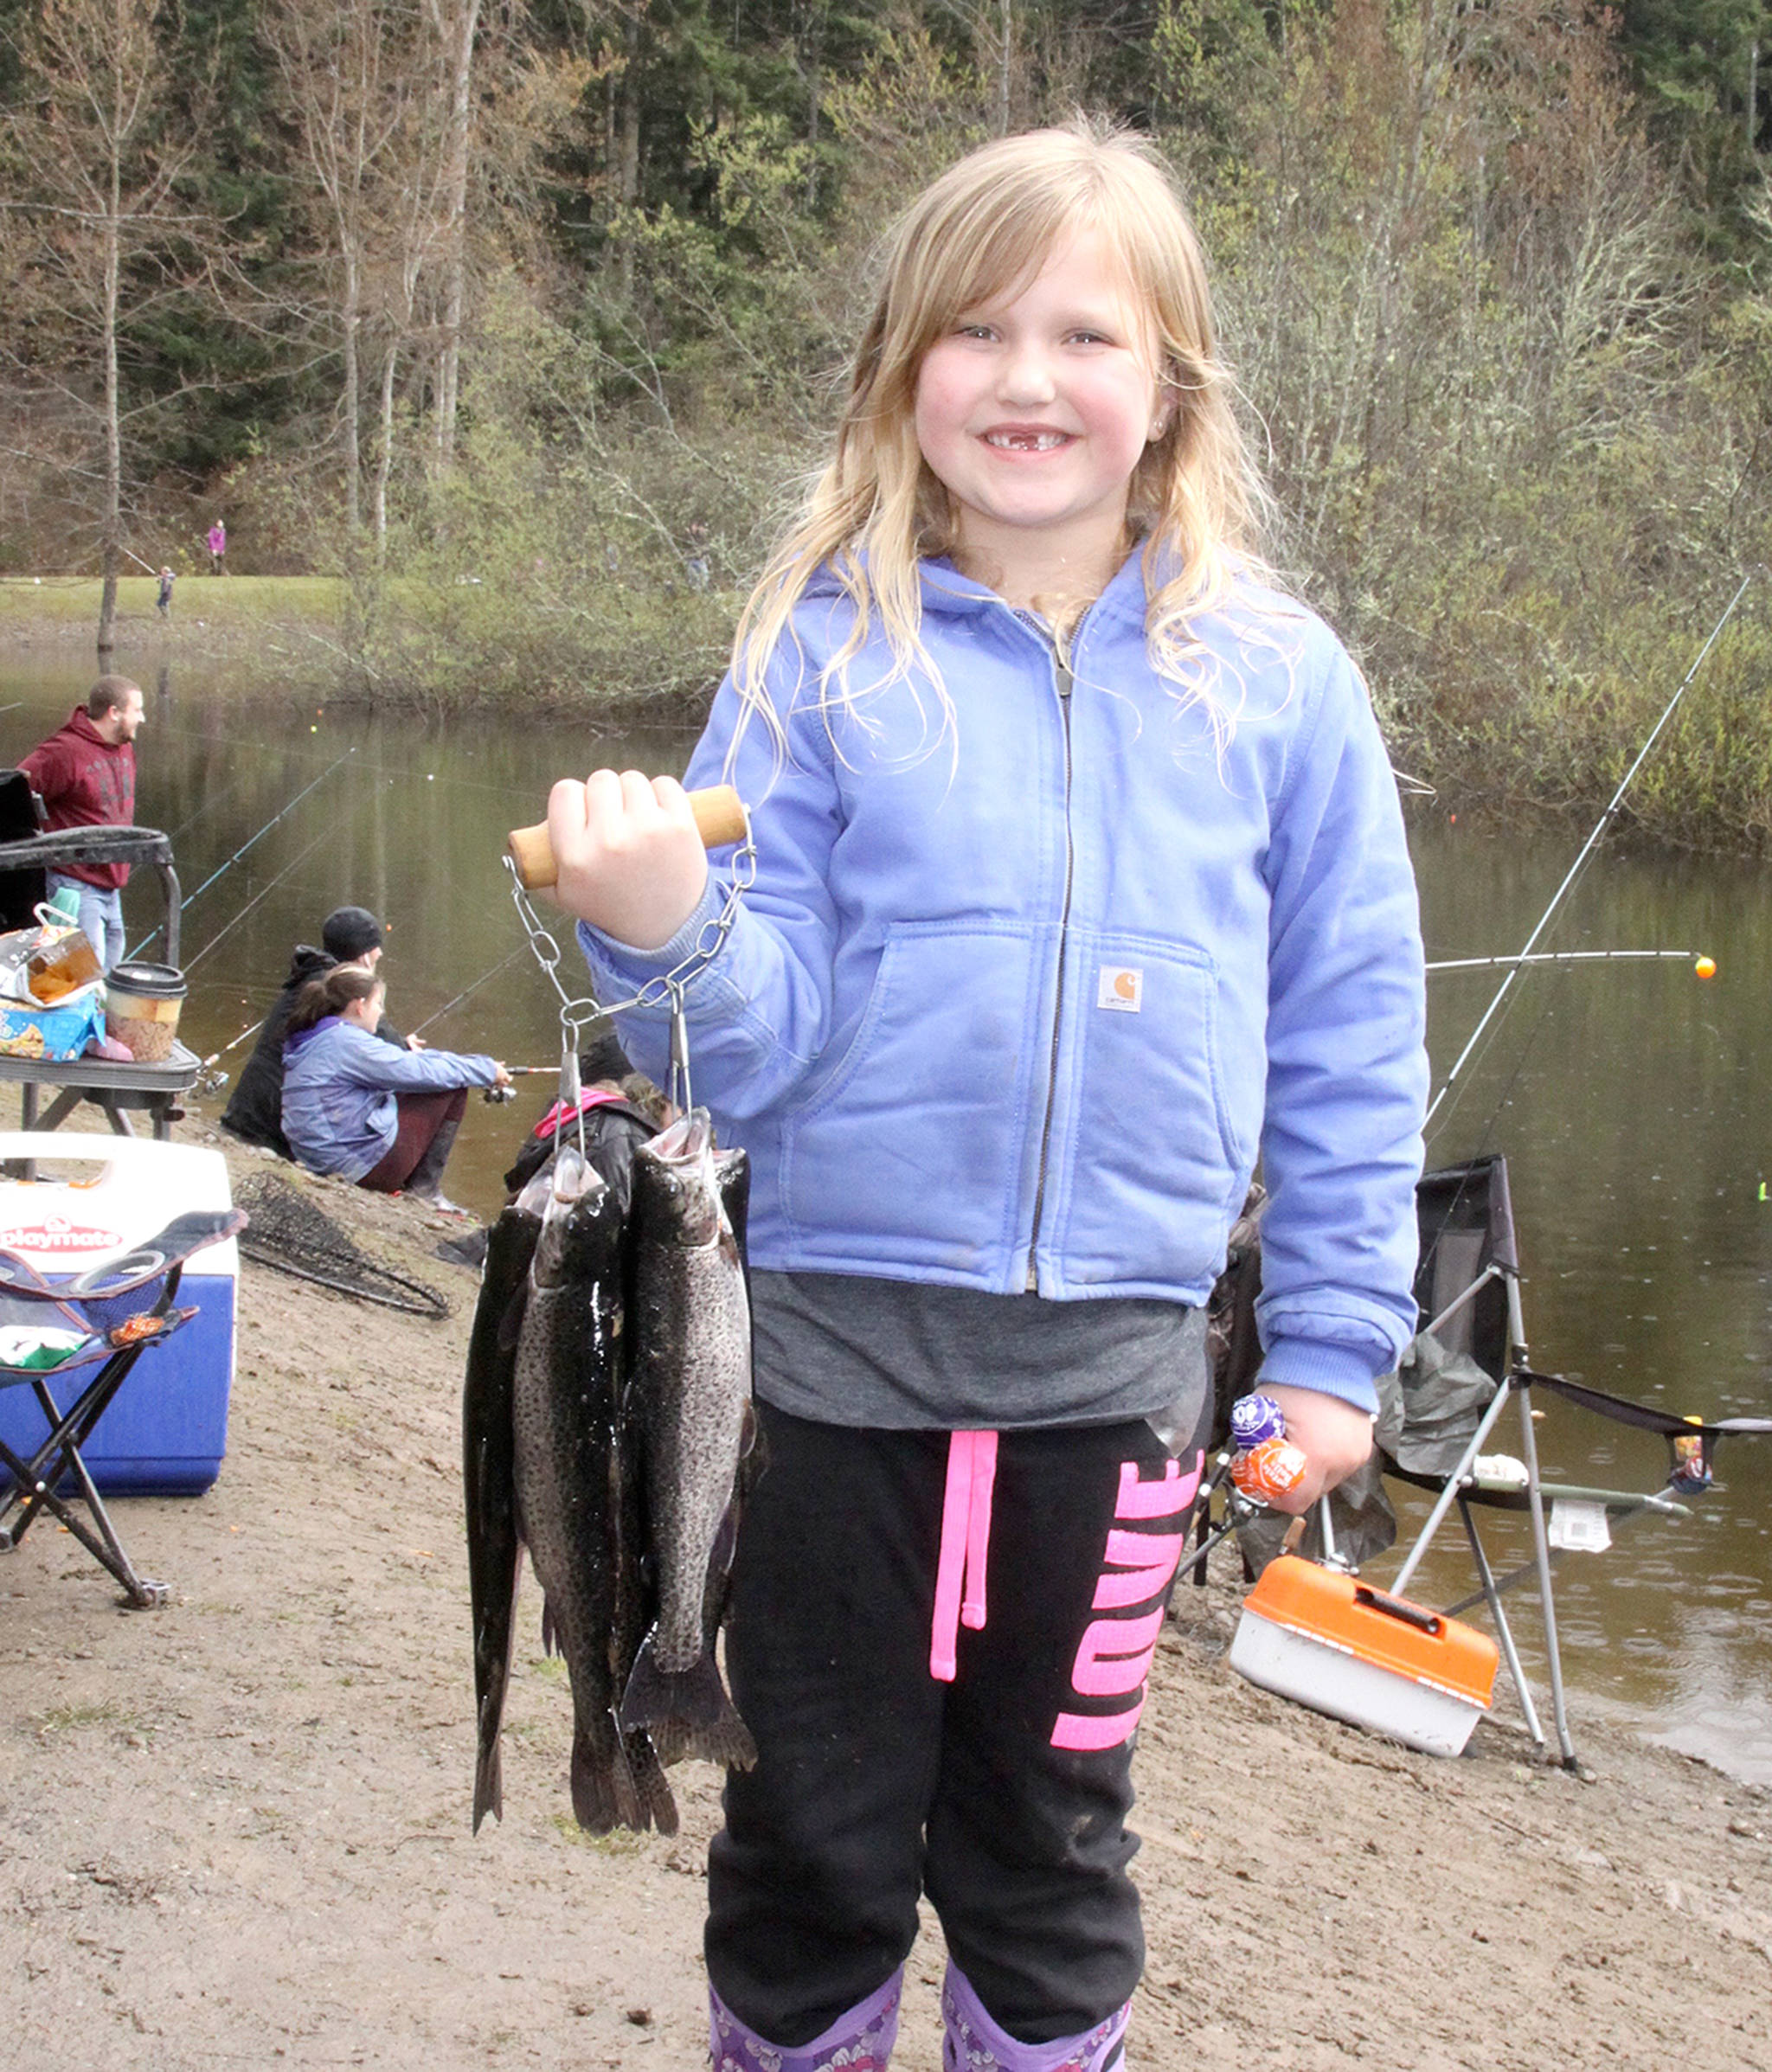 AREA SPORTS BRIEFS: Area 6 closing to chinook retention; summer soccer camps; fishing derby reels them in